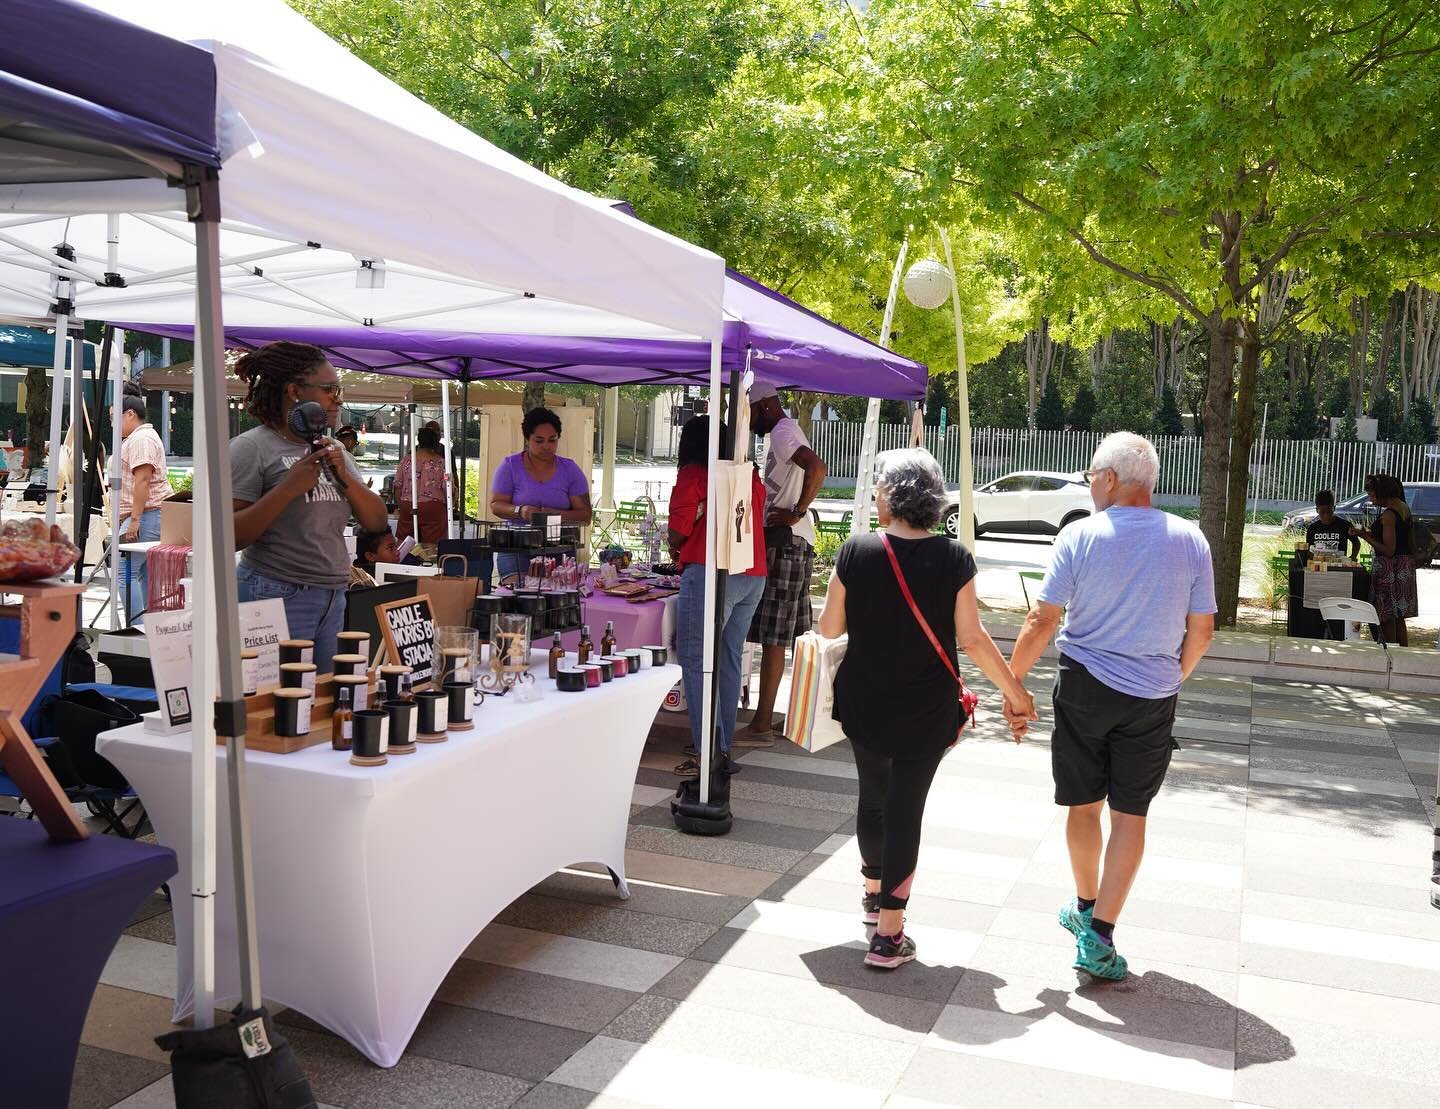 Boho Market
Sunday, April 28, 11 AM - 3 PM 
 
Boho Market returns with a flurry of funky finds and artisanal treasures on this Sunday Funday. Don&rsquo;t miss out on this pop-up pavilion while listening to the talents of Carlos Averhoff, Jr. in celeb